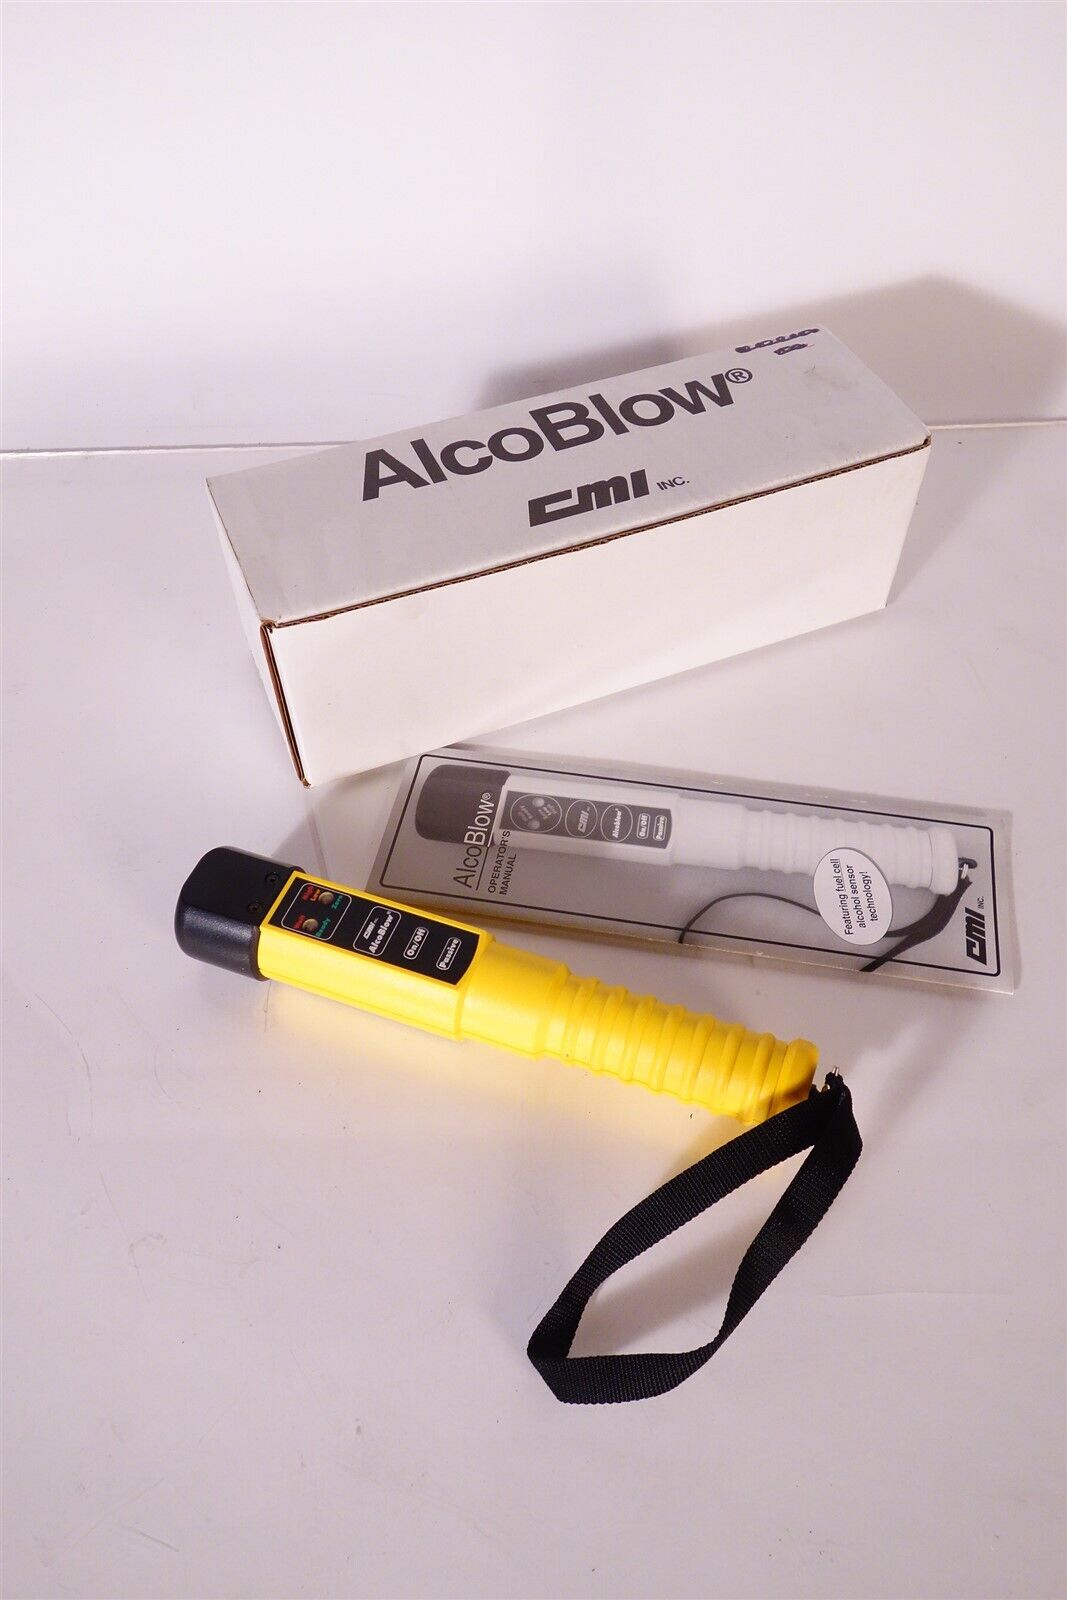 Alcoblow Portable Police Handheld Alcohol Breathalyzer Tester Tested Excellent